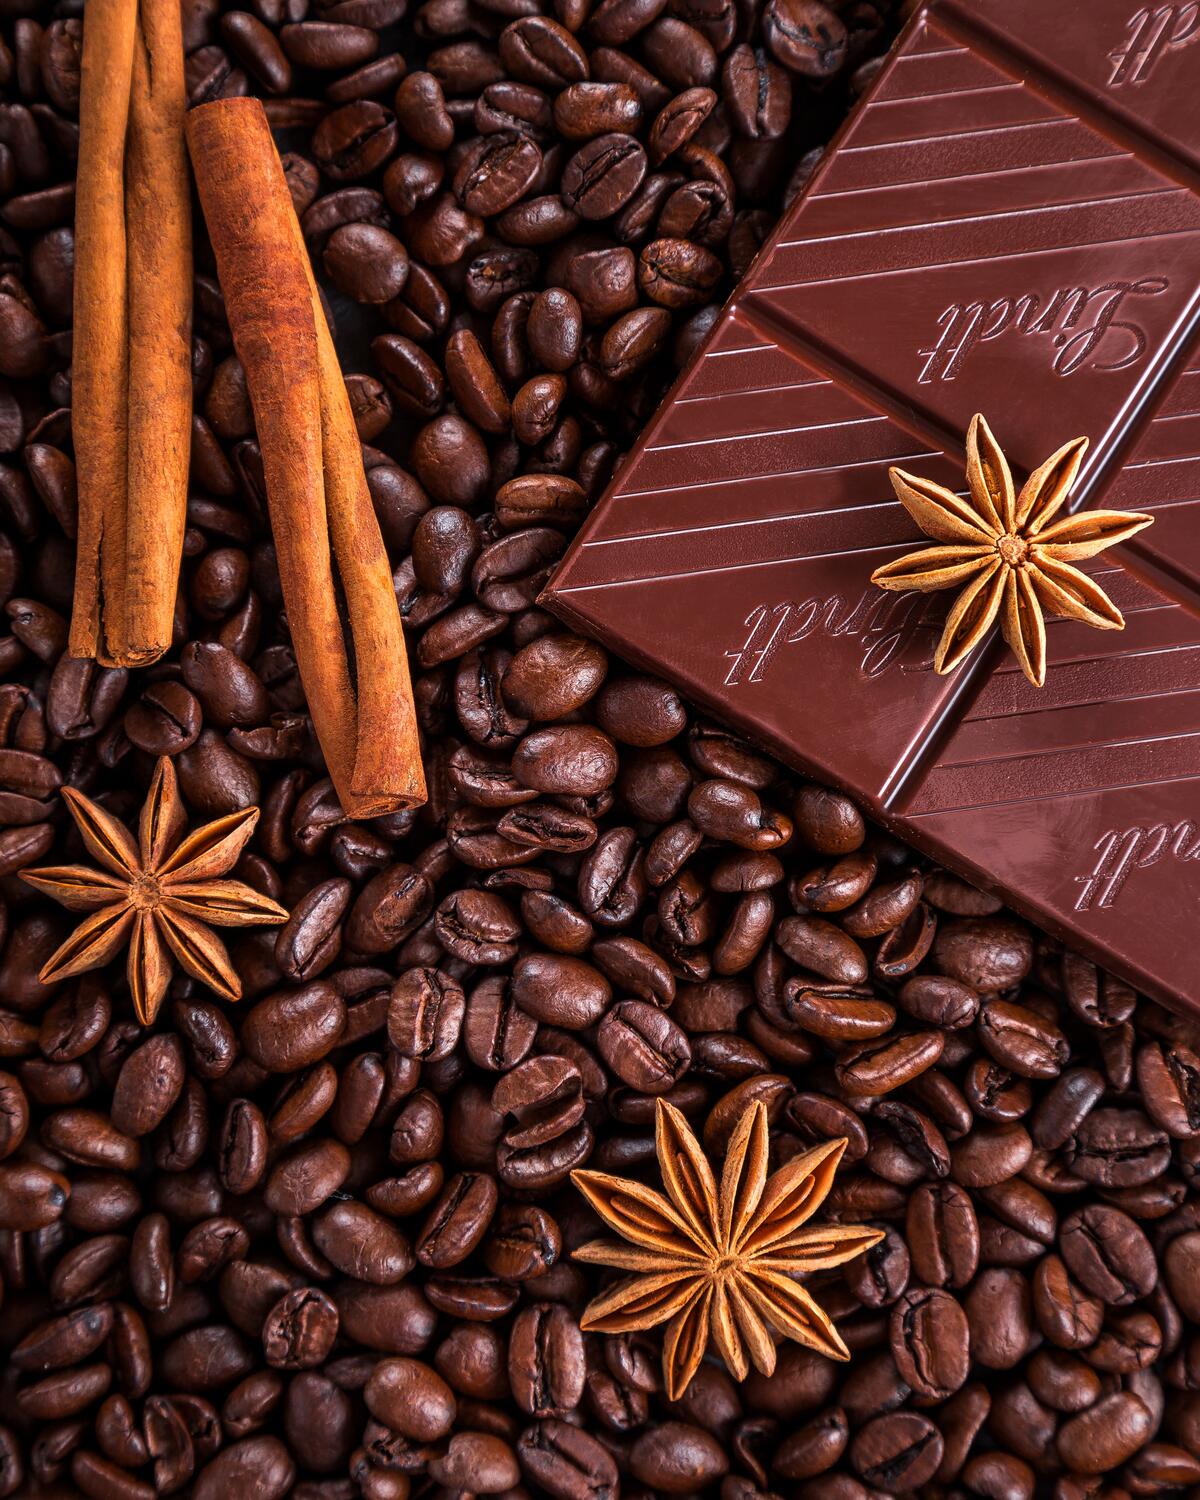 A picture of coffee beans and dark chocolate.